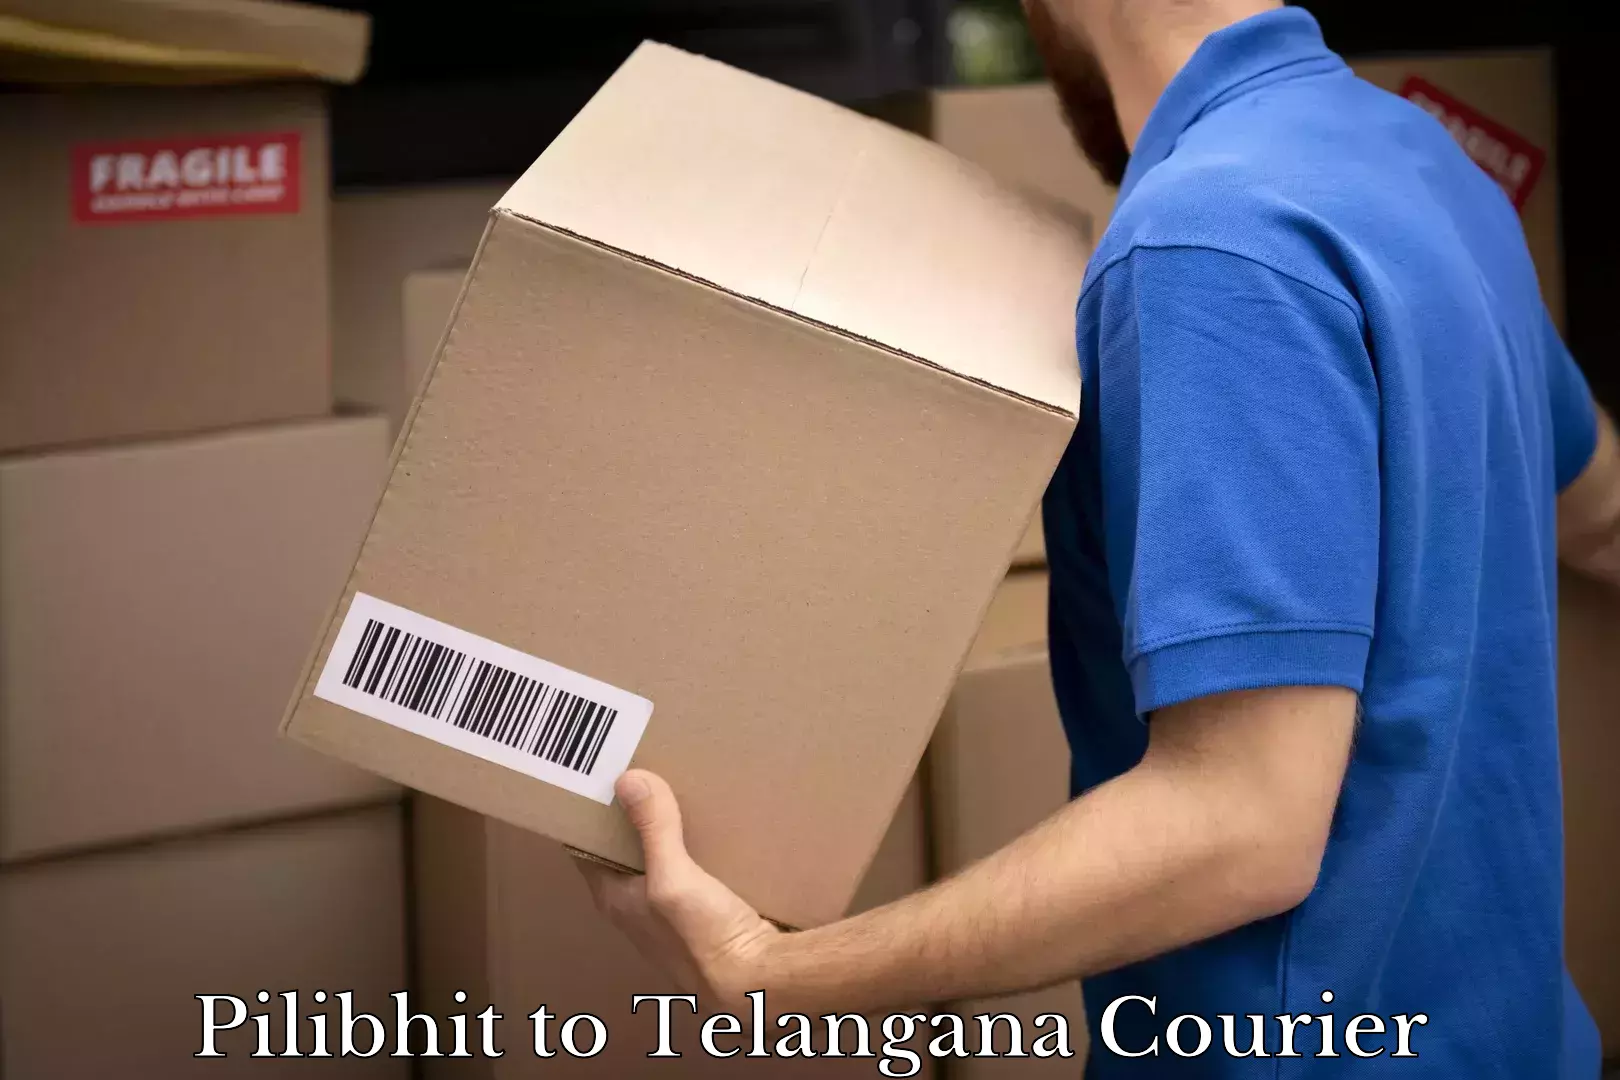 Parcel service for businesses Pilibhit to Telangana